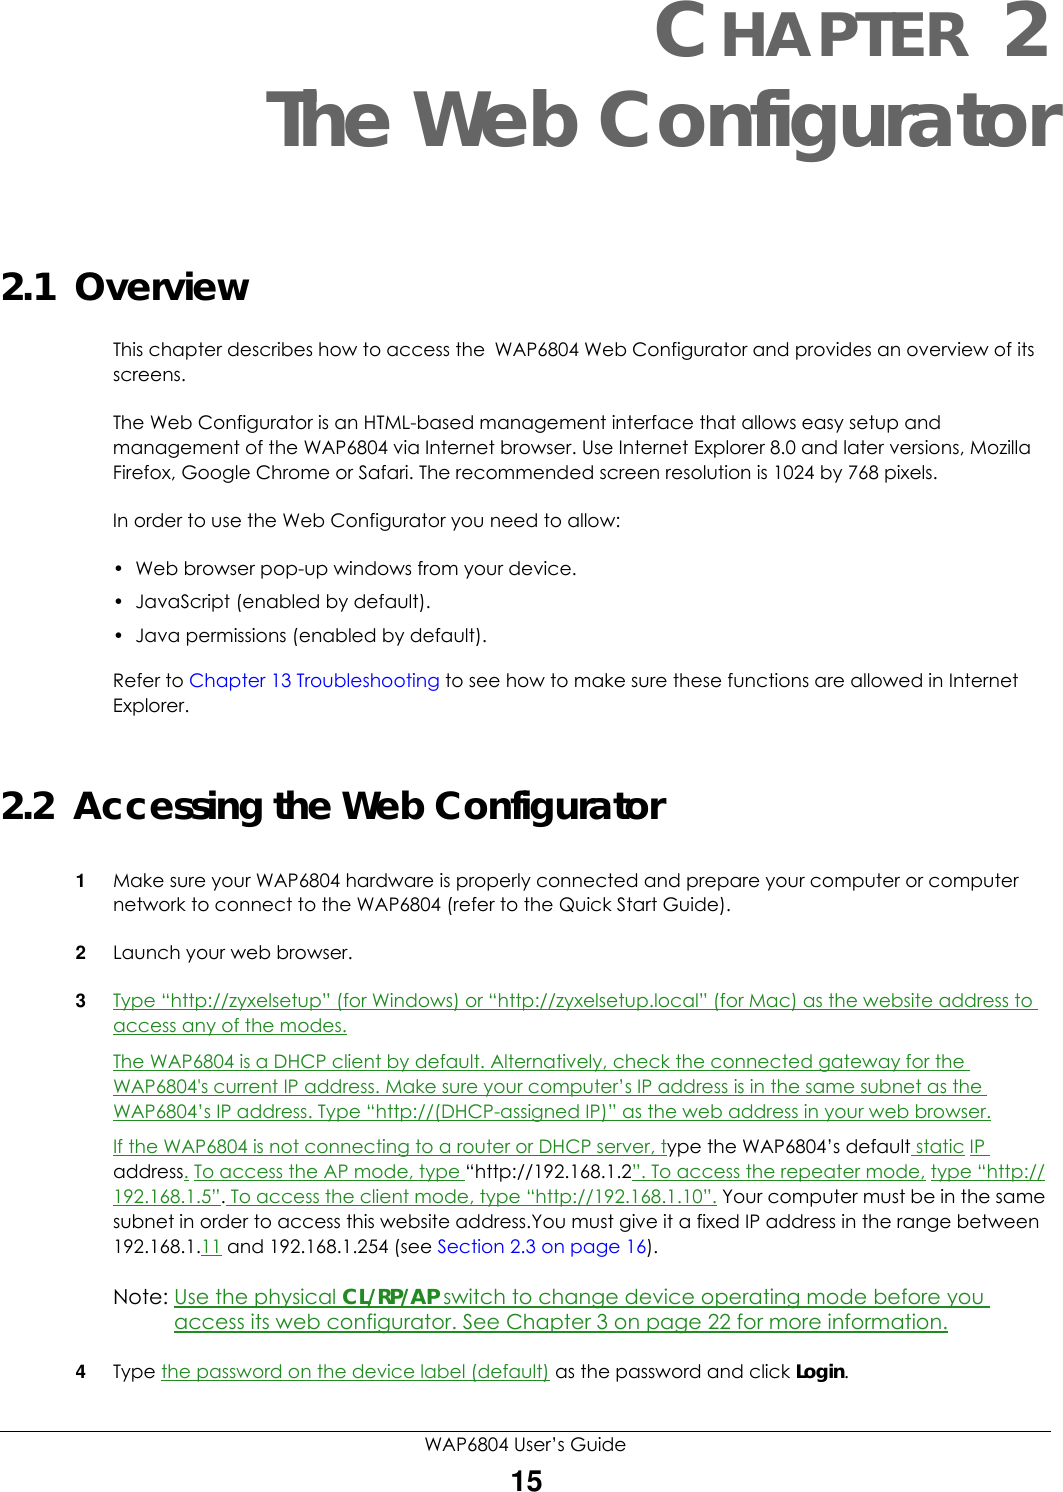 WAP6804 User’s Guide15CHAPTER 2The Web Configurator2.1  OverviewThis chapter describes how to access the WAP6804 Web Configurator and provides an overview of its screens.The Web Configurator is an HTML-based management interface that allows easy setup and management of the WAP6804 via Internet browser. Use Internet Explorer 8.0 and later versions, Mozilla Firefox, Google Chrome or Safari. The recommended screen resolution is 1024 by 768 pixels.In order to use the Web Configurator you need to allow:• Web browser pop-up windows from your device.• JavaScript (enabled by default).• Java permissions (enabled by default).Refer to Chapter 13 Troubleshooting to see how to make sure these functions are allowed in Internet Explorer.2.2  Accessing the Web Configurator1Make sure your WAP6804 hardware is properly connected and prepare your computer or computer network to connect to the WAP6804 (refer to the Quick Start Guide).2Launch your web browser.3Type “http://zyxelsetup” (for Windows) or “http://zyxelsetup.local” (for Mac) as the website address to access any of the modes.The WAP6804 is a DHCP client by default. Alternatively, check the connected gateway for the WAP6804&apos;s current IP address. Make sure your computer’s IP address is in the same subnet as the WAP6804’s IP address. Type “http://(DHCP-assigned IP)” as the web address in your web browser.If the WAP6804 is not connecting to a router or DHCP server, type the WAP6804’s default static IP address. To access the AP mode, type “http://192.168.1.2”. To access the repeater mode, type “http://192.168.1.5”. To access the client mode, type “http://192.168.1.10”. Your computer must be in the same subnet in order to access this website address.You must give it a fixed IP address in the range between 192.168.1.11 and 192.168.1.254 (see Section 2.3 on page 16).Note: Use the physical CL/RP/AP switch to change device operating mode before you access its web configurator. See Chapter 3 on page 22 for more information.4Type the password on the device label (default) as the password and click Login. 